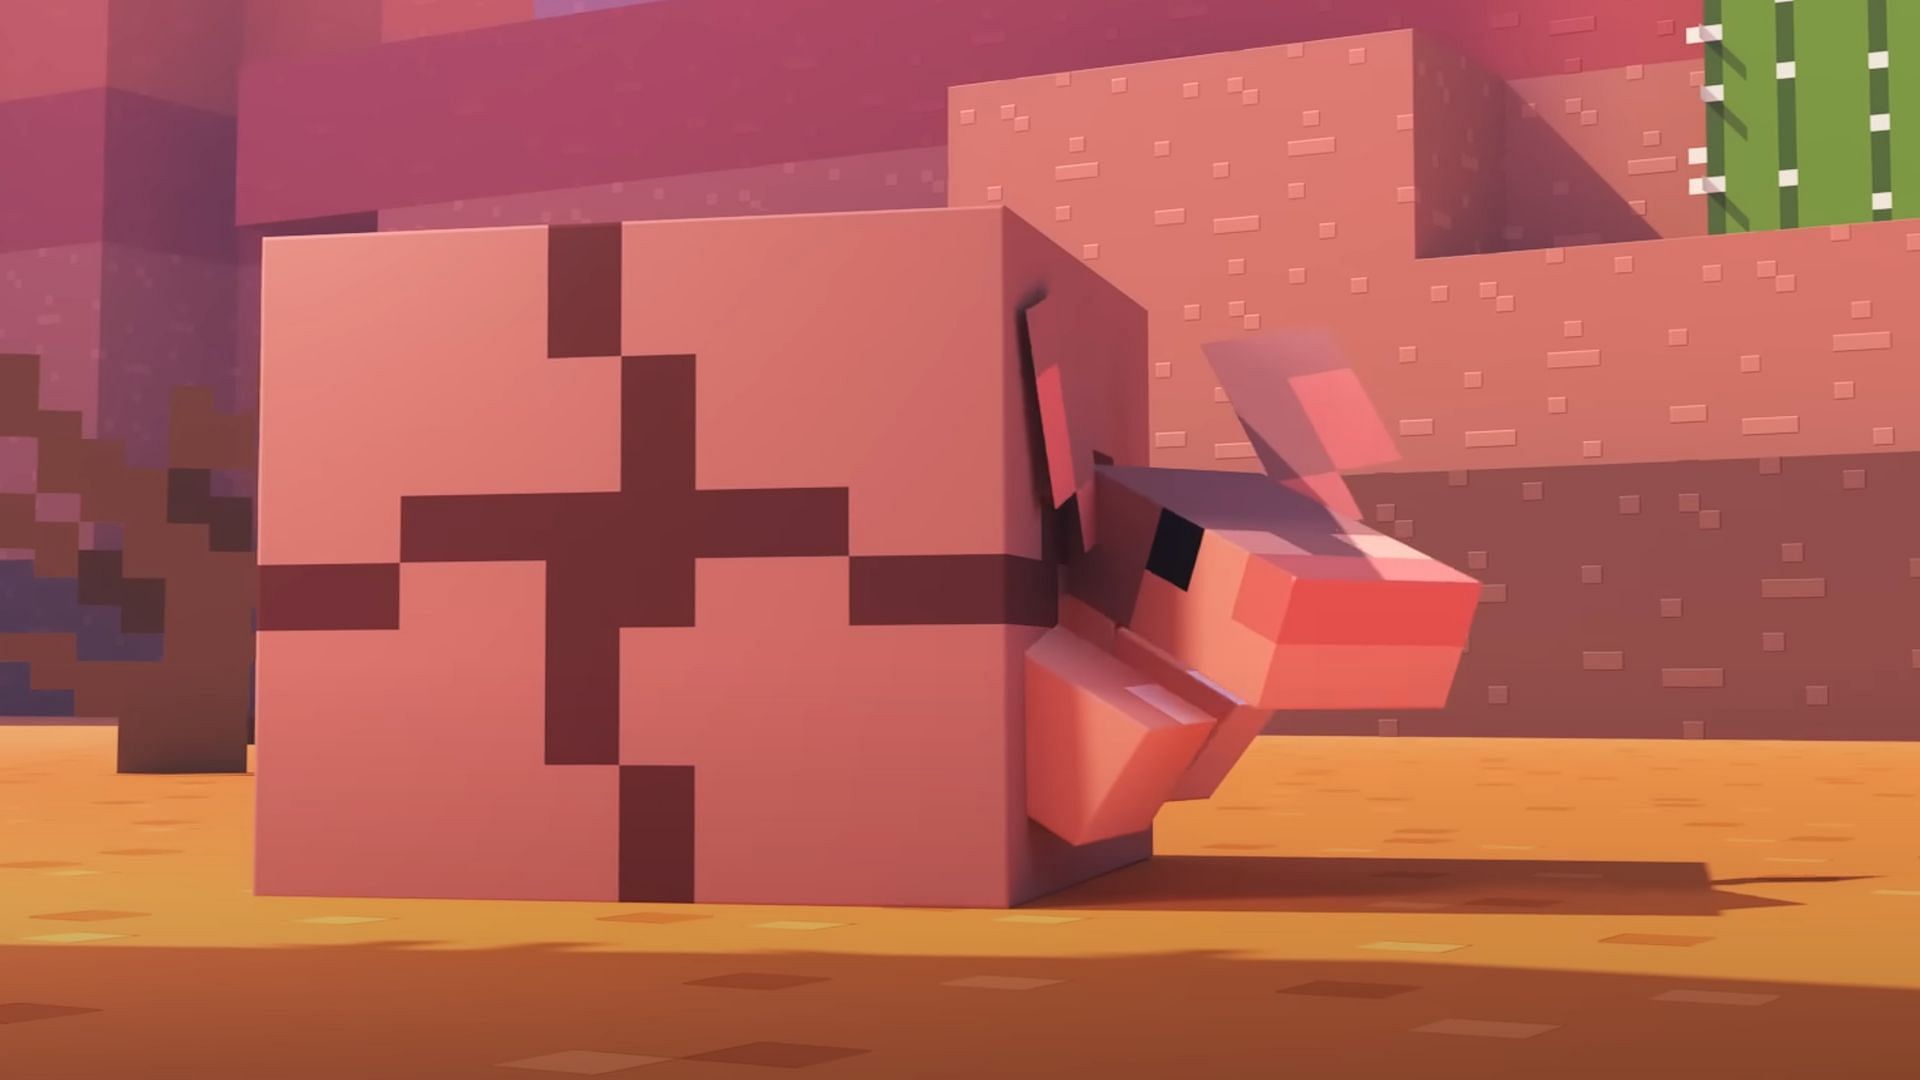 The official armadillo render peeking out to check for danger (Image via Mojang)